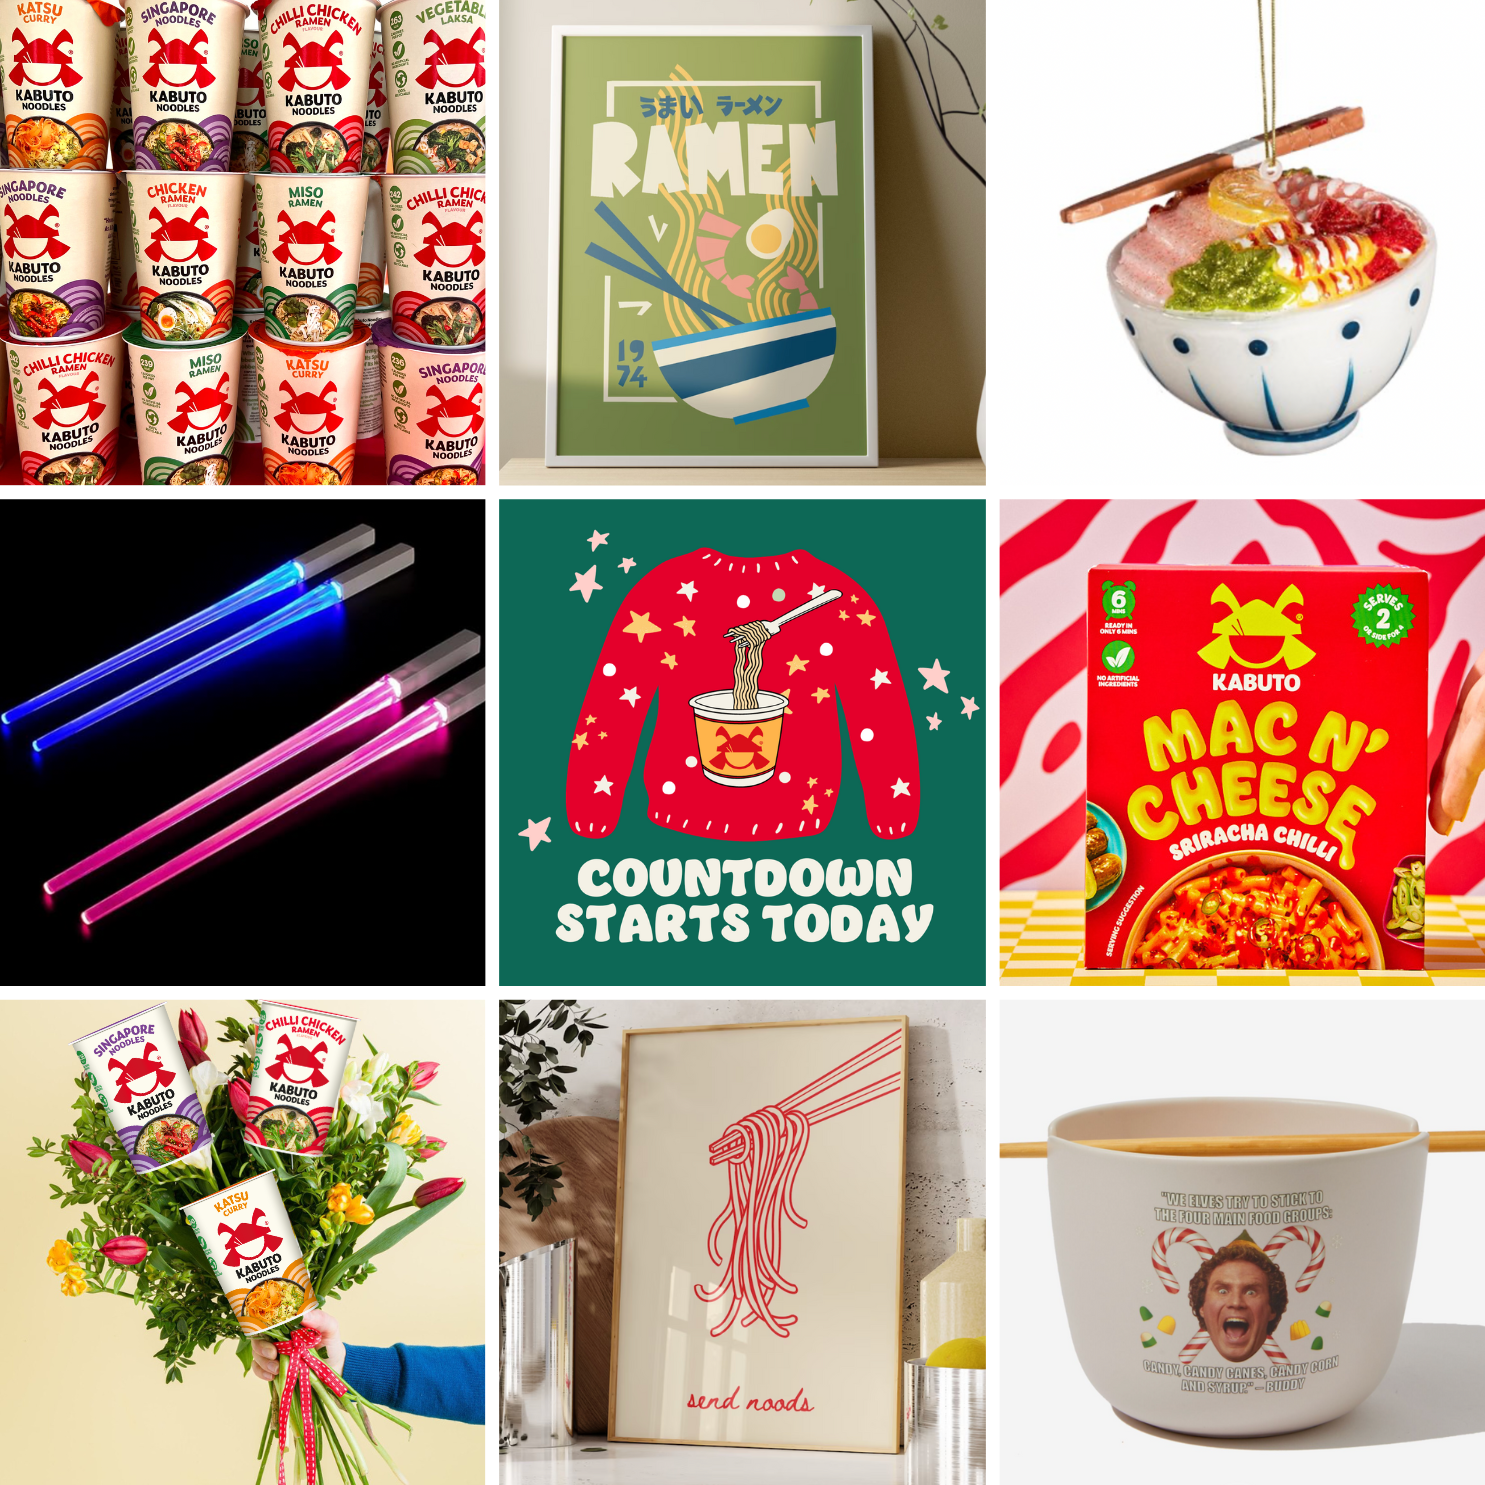 Unwrapping Joy: The Noodle Lover's Extravaganza Gift Guide for the Holidays!